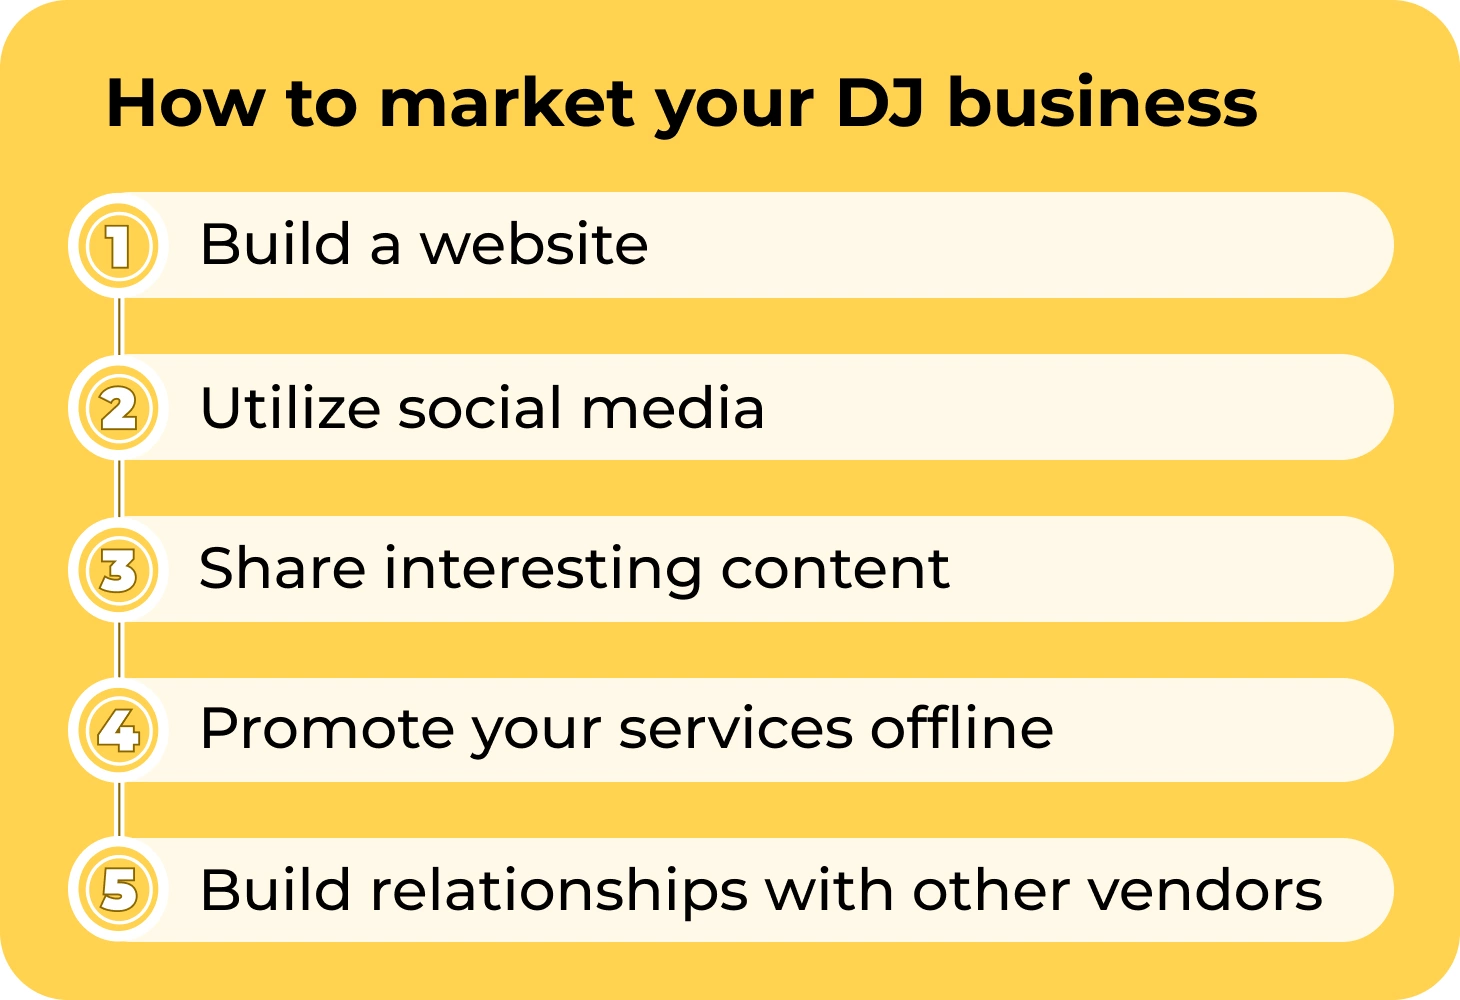 How to market your DJ business